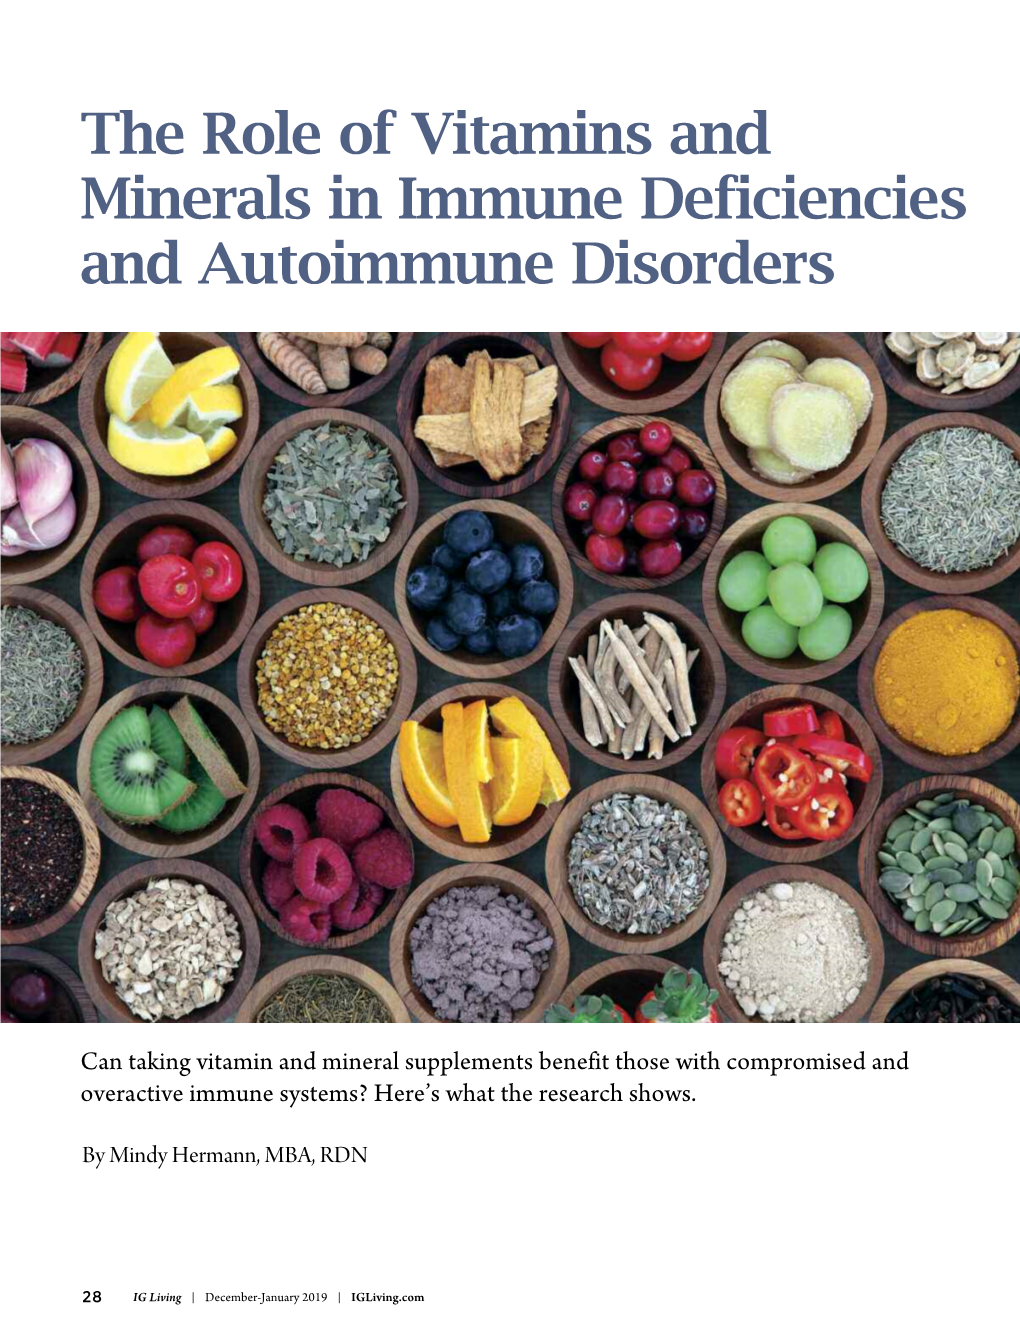 The Role of Vitamins and Minerals in Immune Deficiencies and Autoimmune Disorders